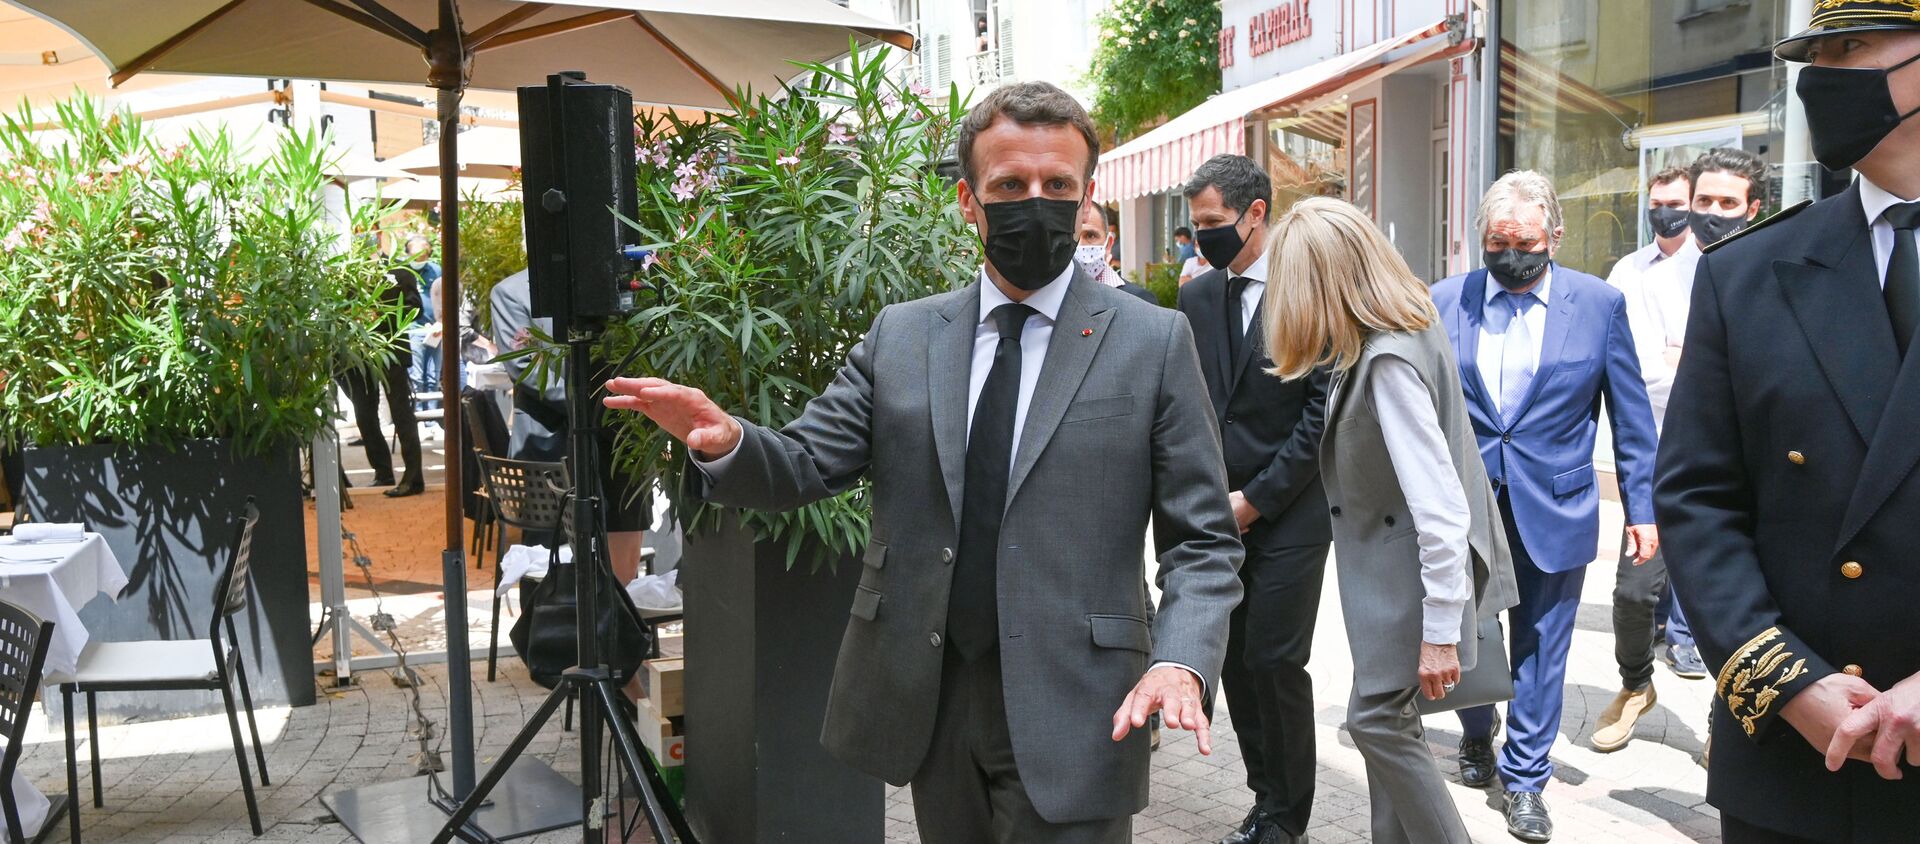 French President Emmanuel Macron arrives for a lunch in Valence, on June 8, 2021, during a day visit in the French southeastern department of Drome, the second stage of a nationwide tour ahead of next year's presidential election. - A bystander slapped Emmanuel Macron across the face during a trip to southeast France on June 8 on the second stop of a nation-wide tour. - Sputnik International, 1920, 10.06.2021